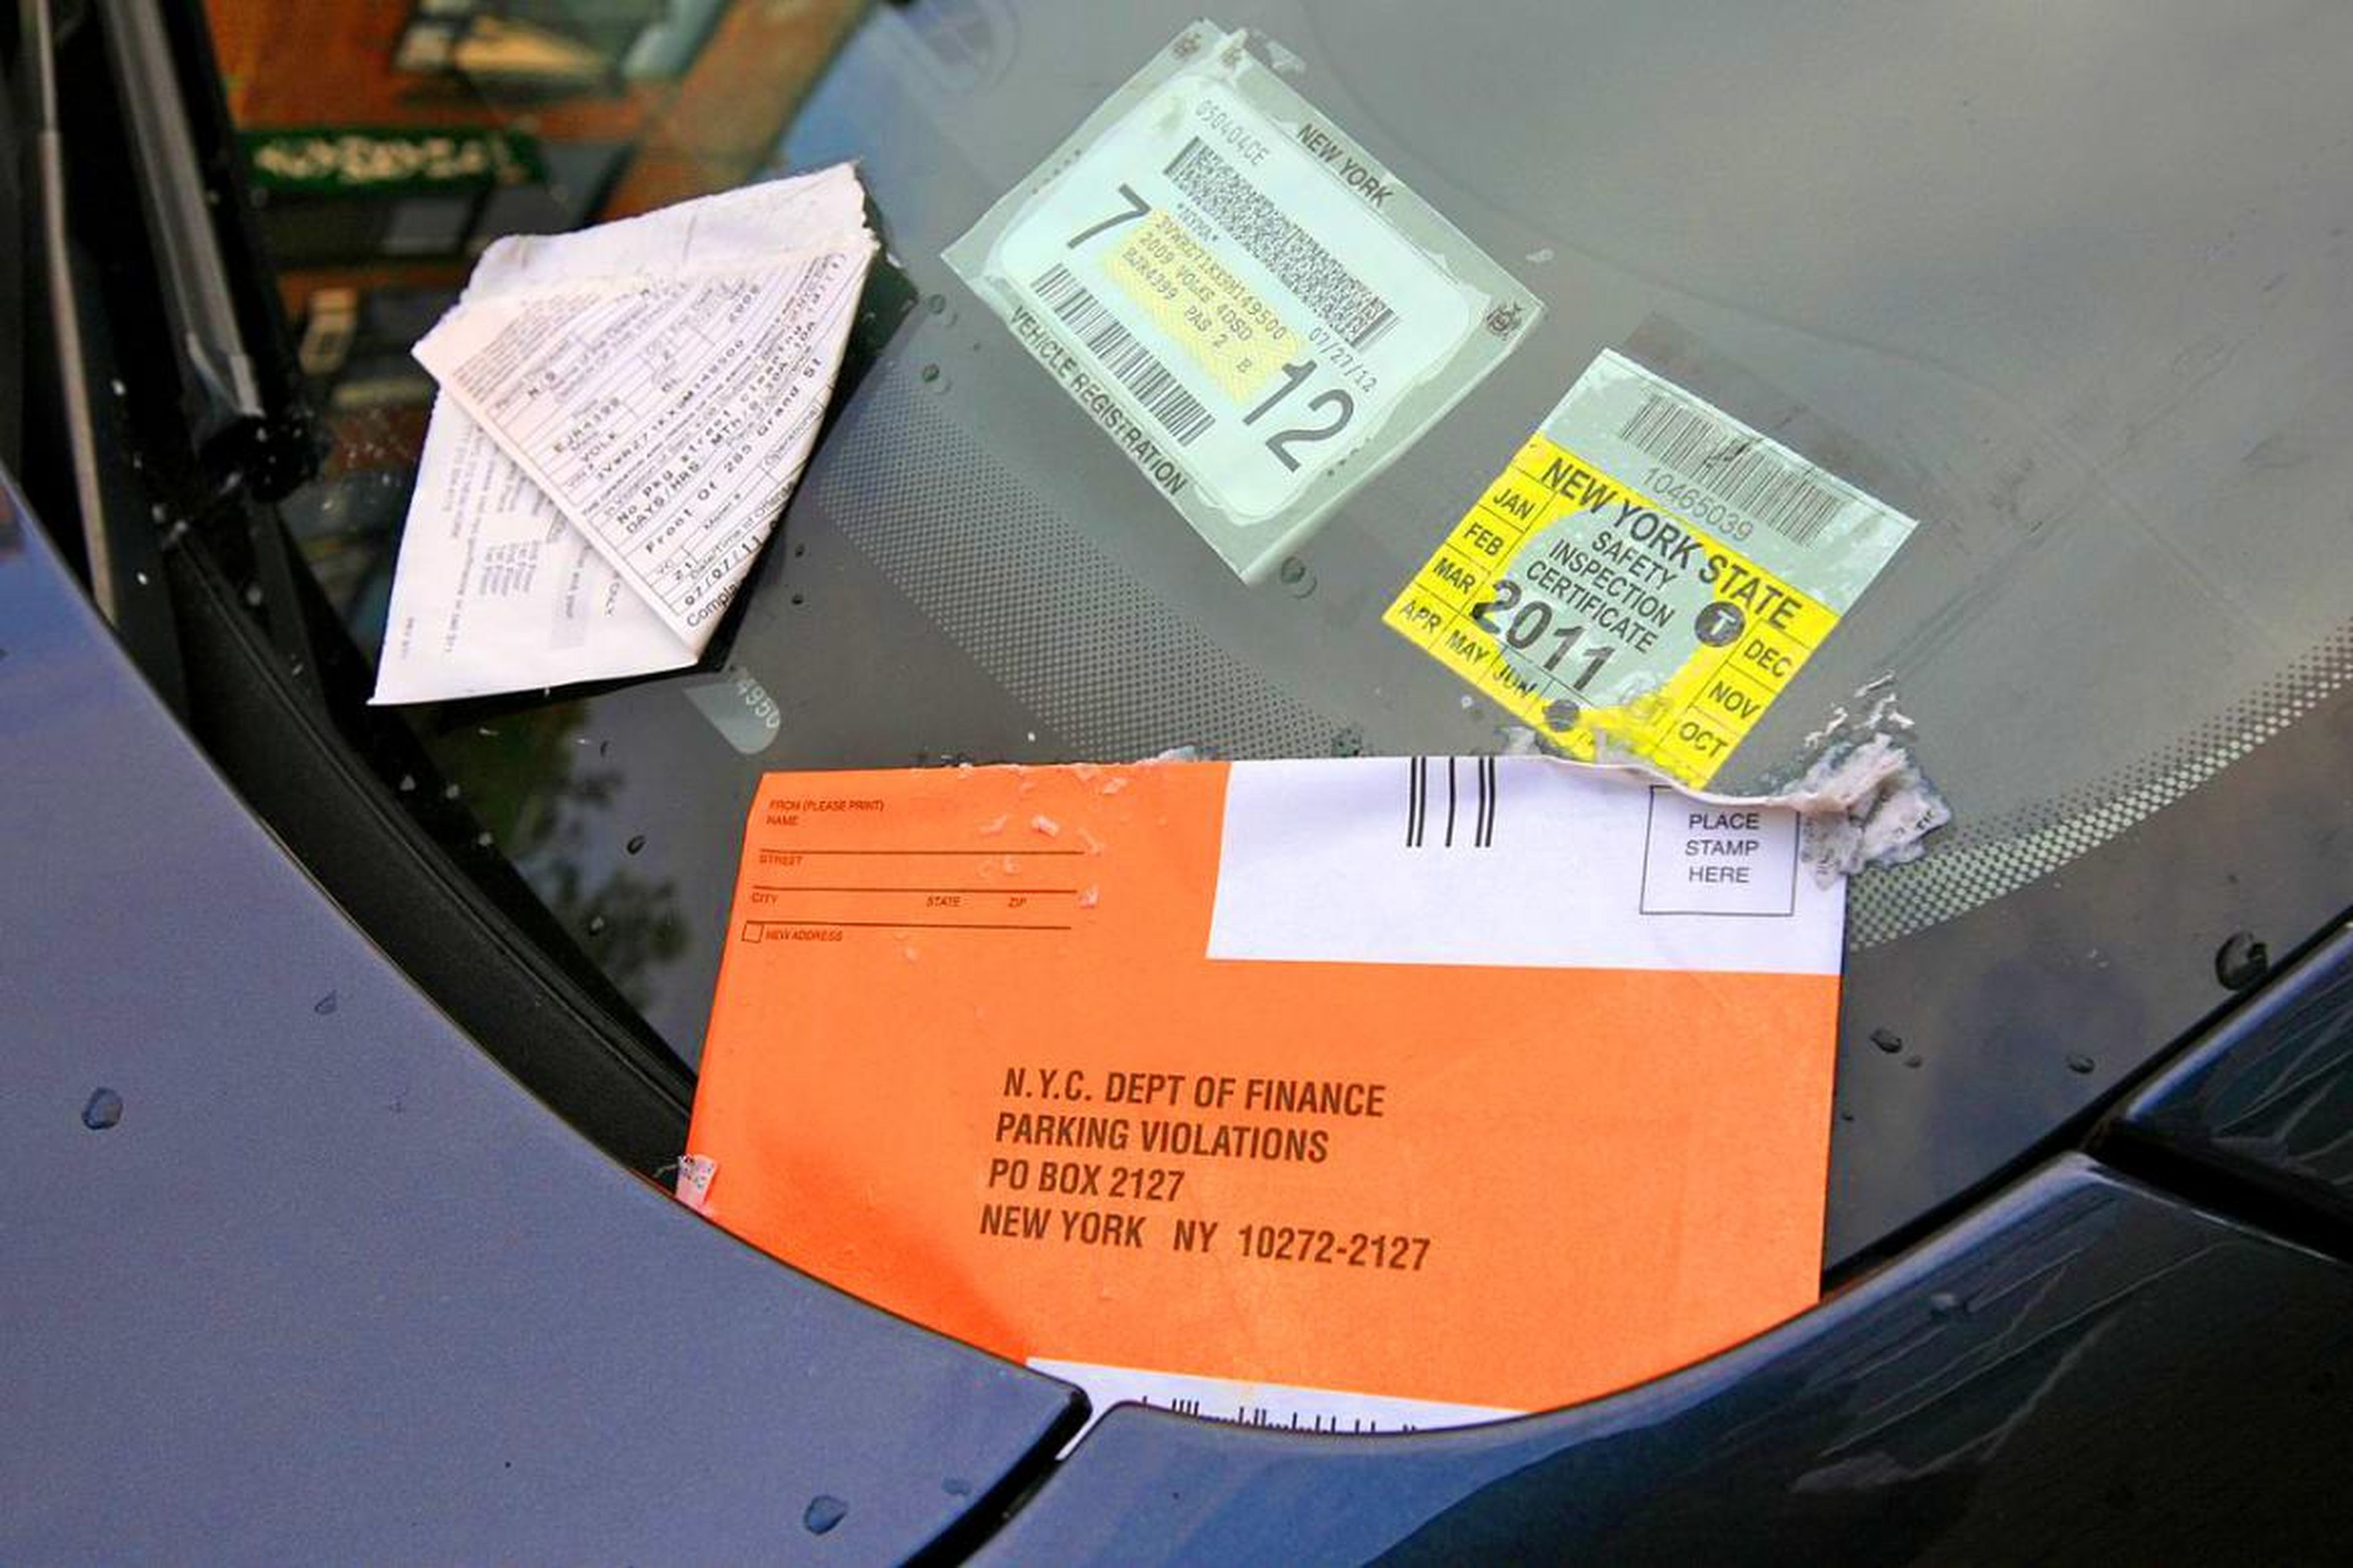 You'll want to pay for parking tickets sooner rather than later.